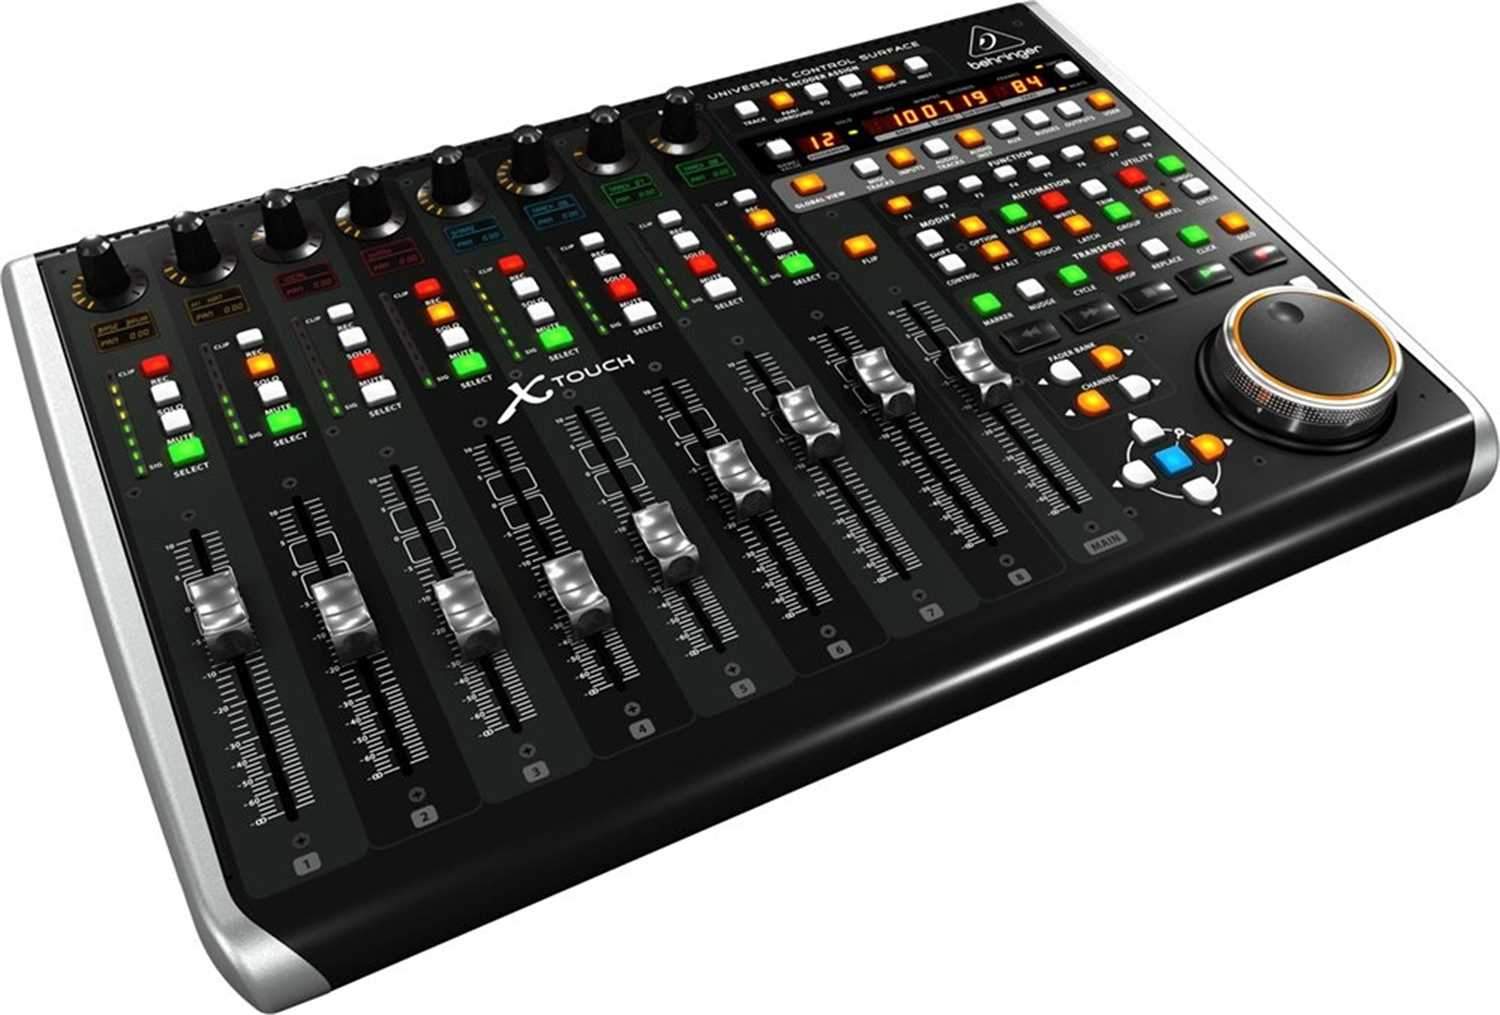 Behringer X-Touch USB Control Surface with X-Touch Extender - PSSL ProSound and Stage Lighting